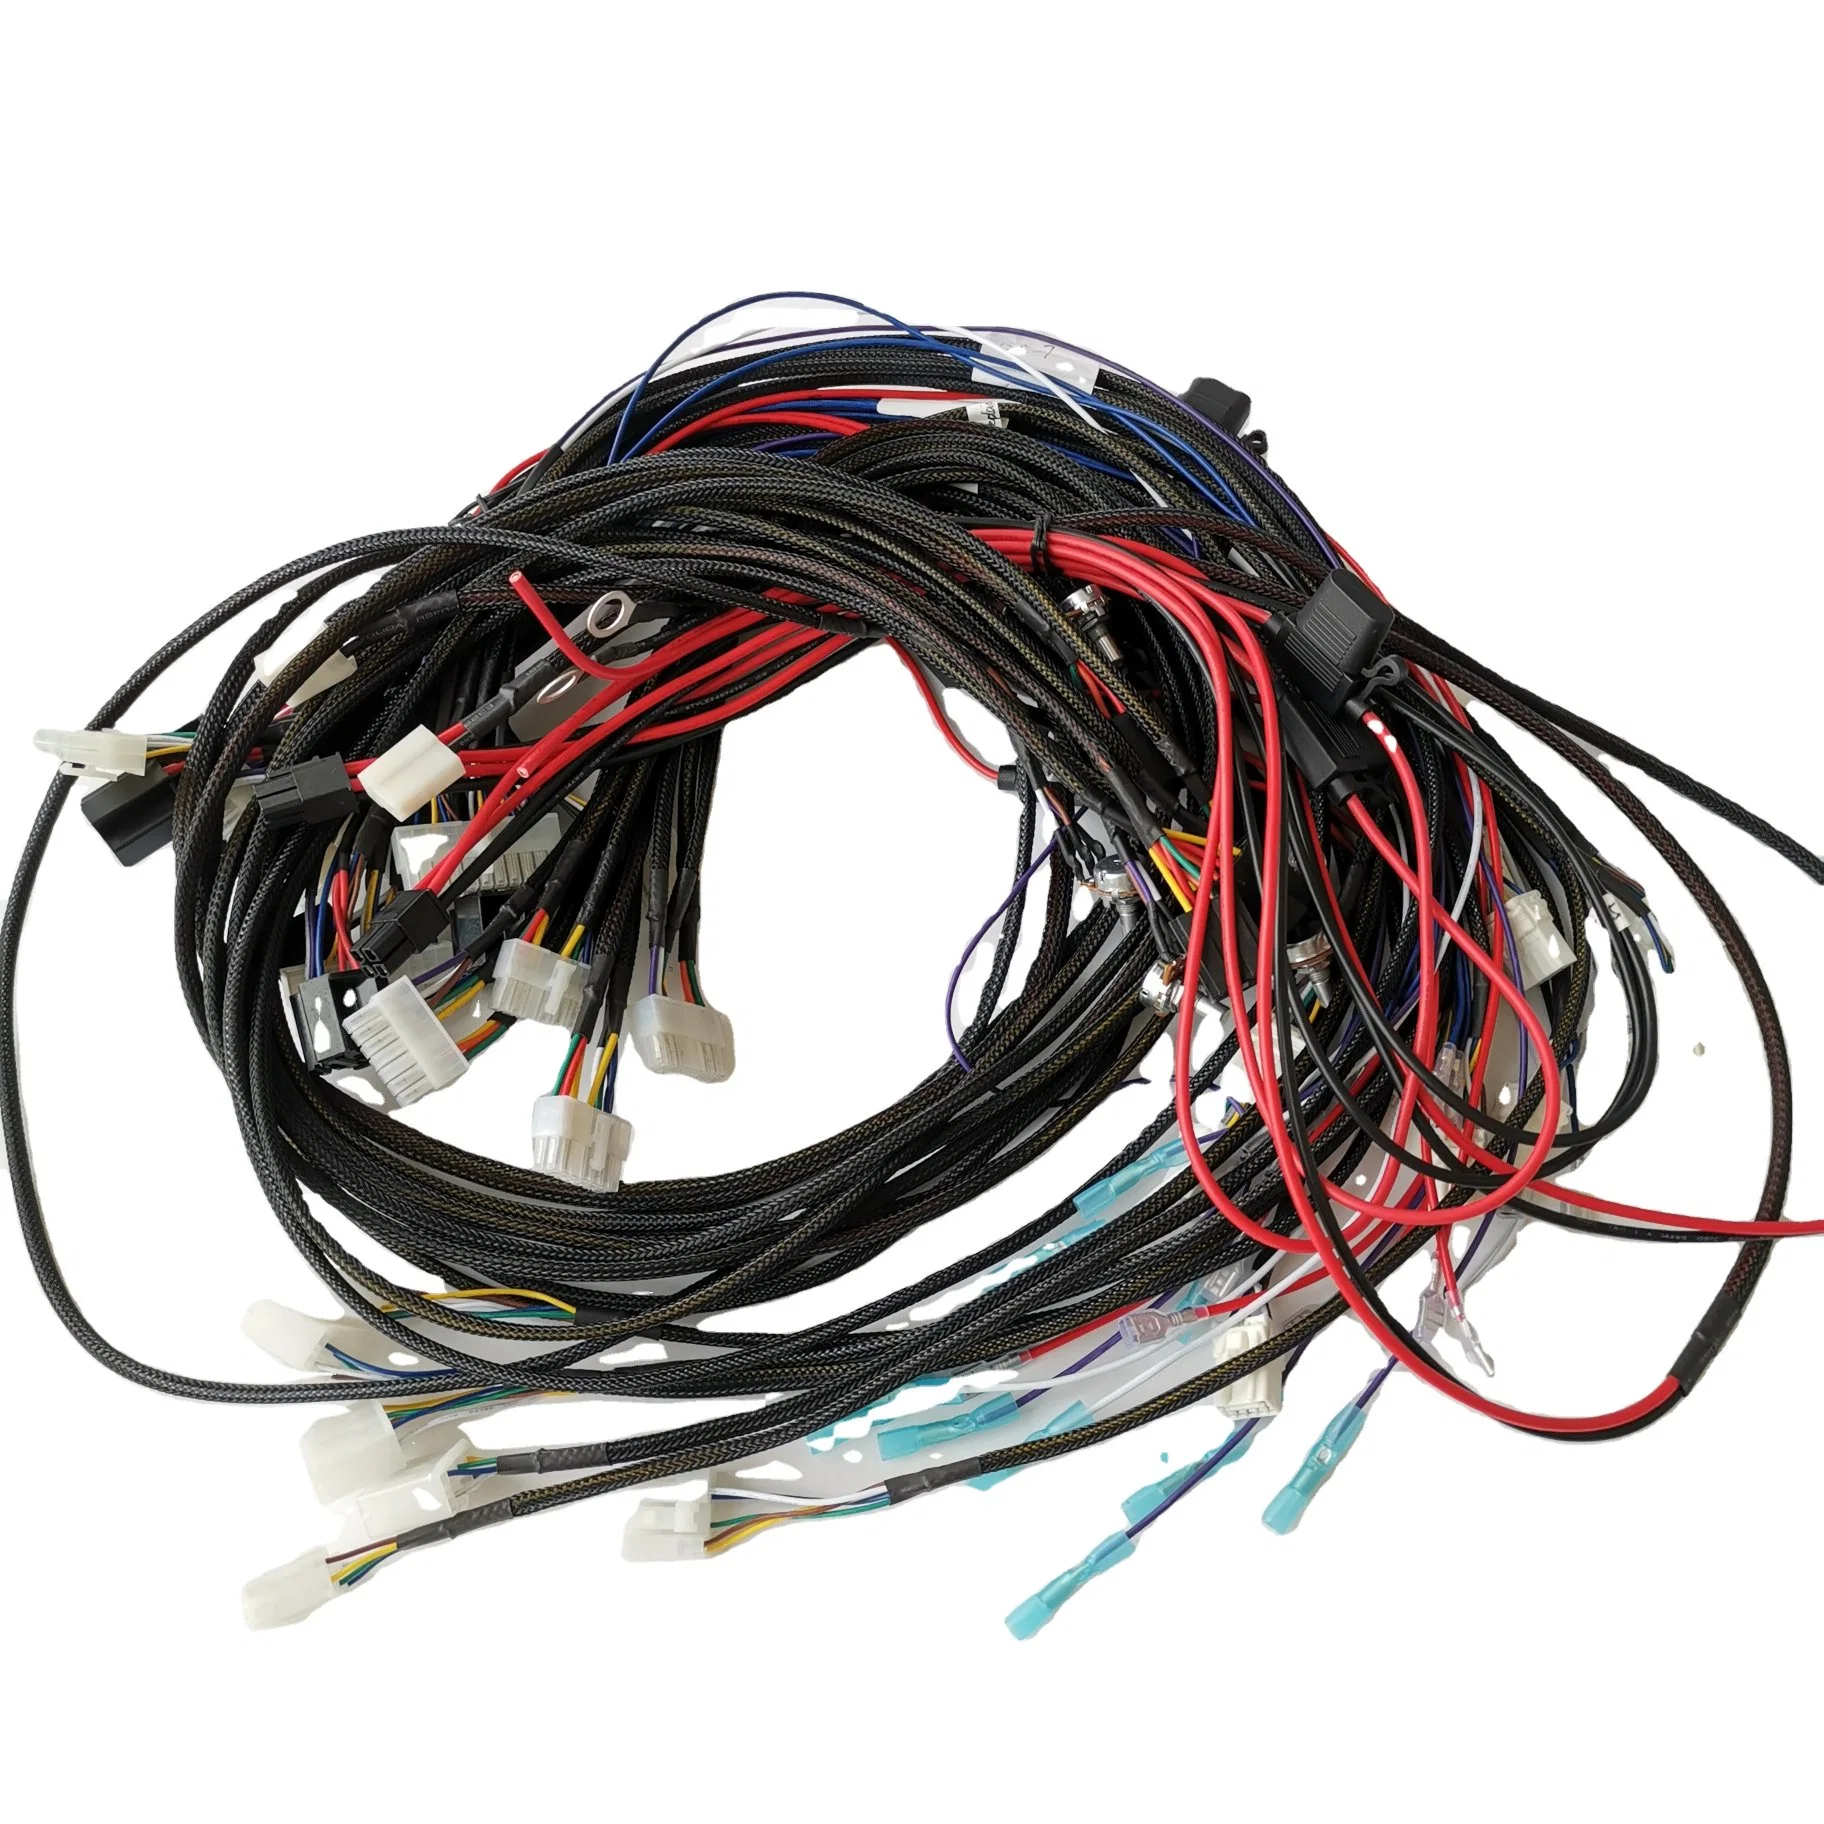 OEM Manufacturer Custom Wiring Harness Cable Assembly Jumper Wire Harness for Internal Electronic Equipment